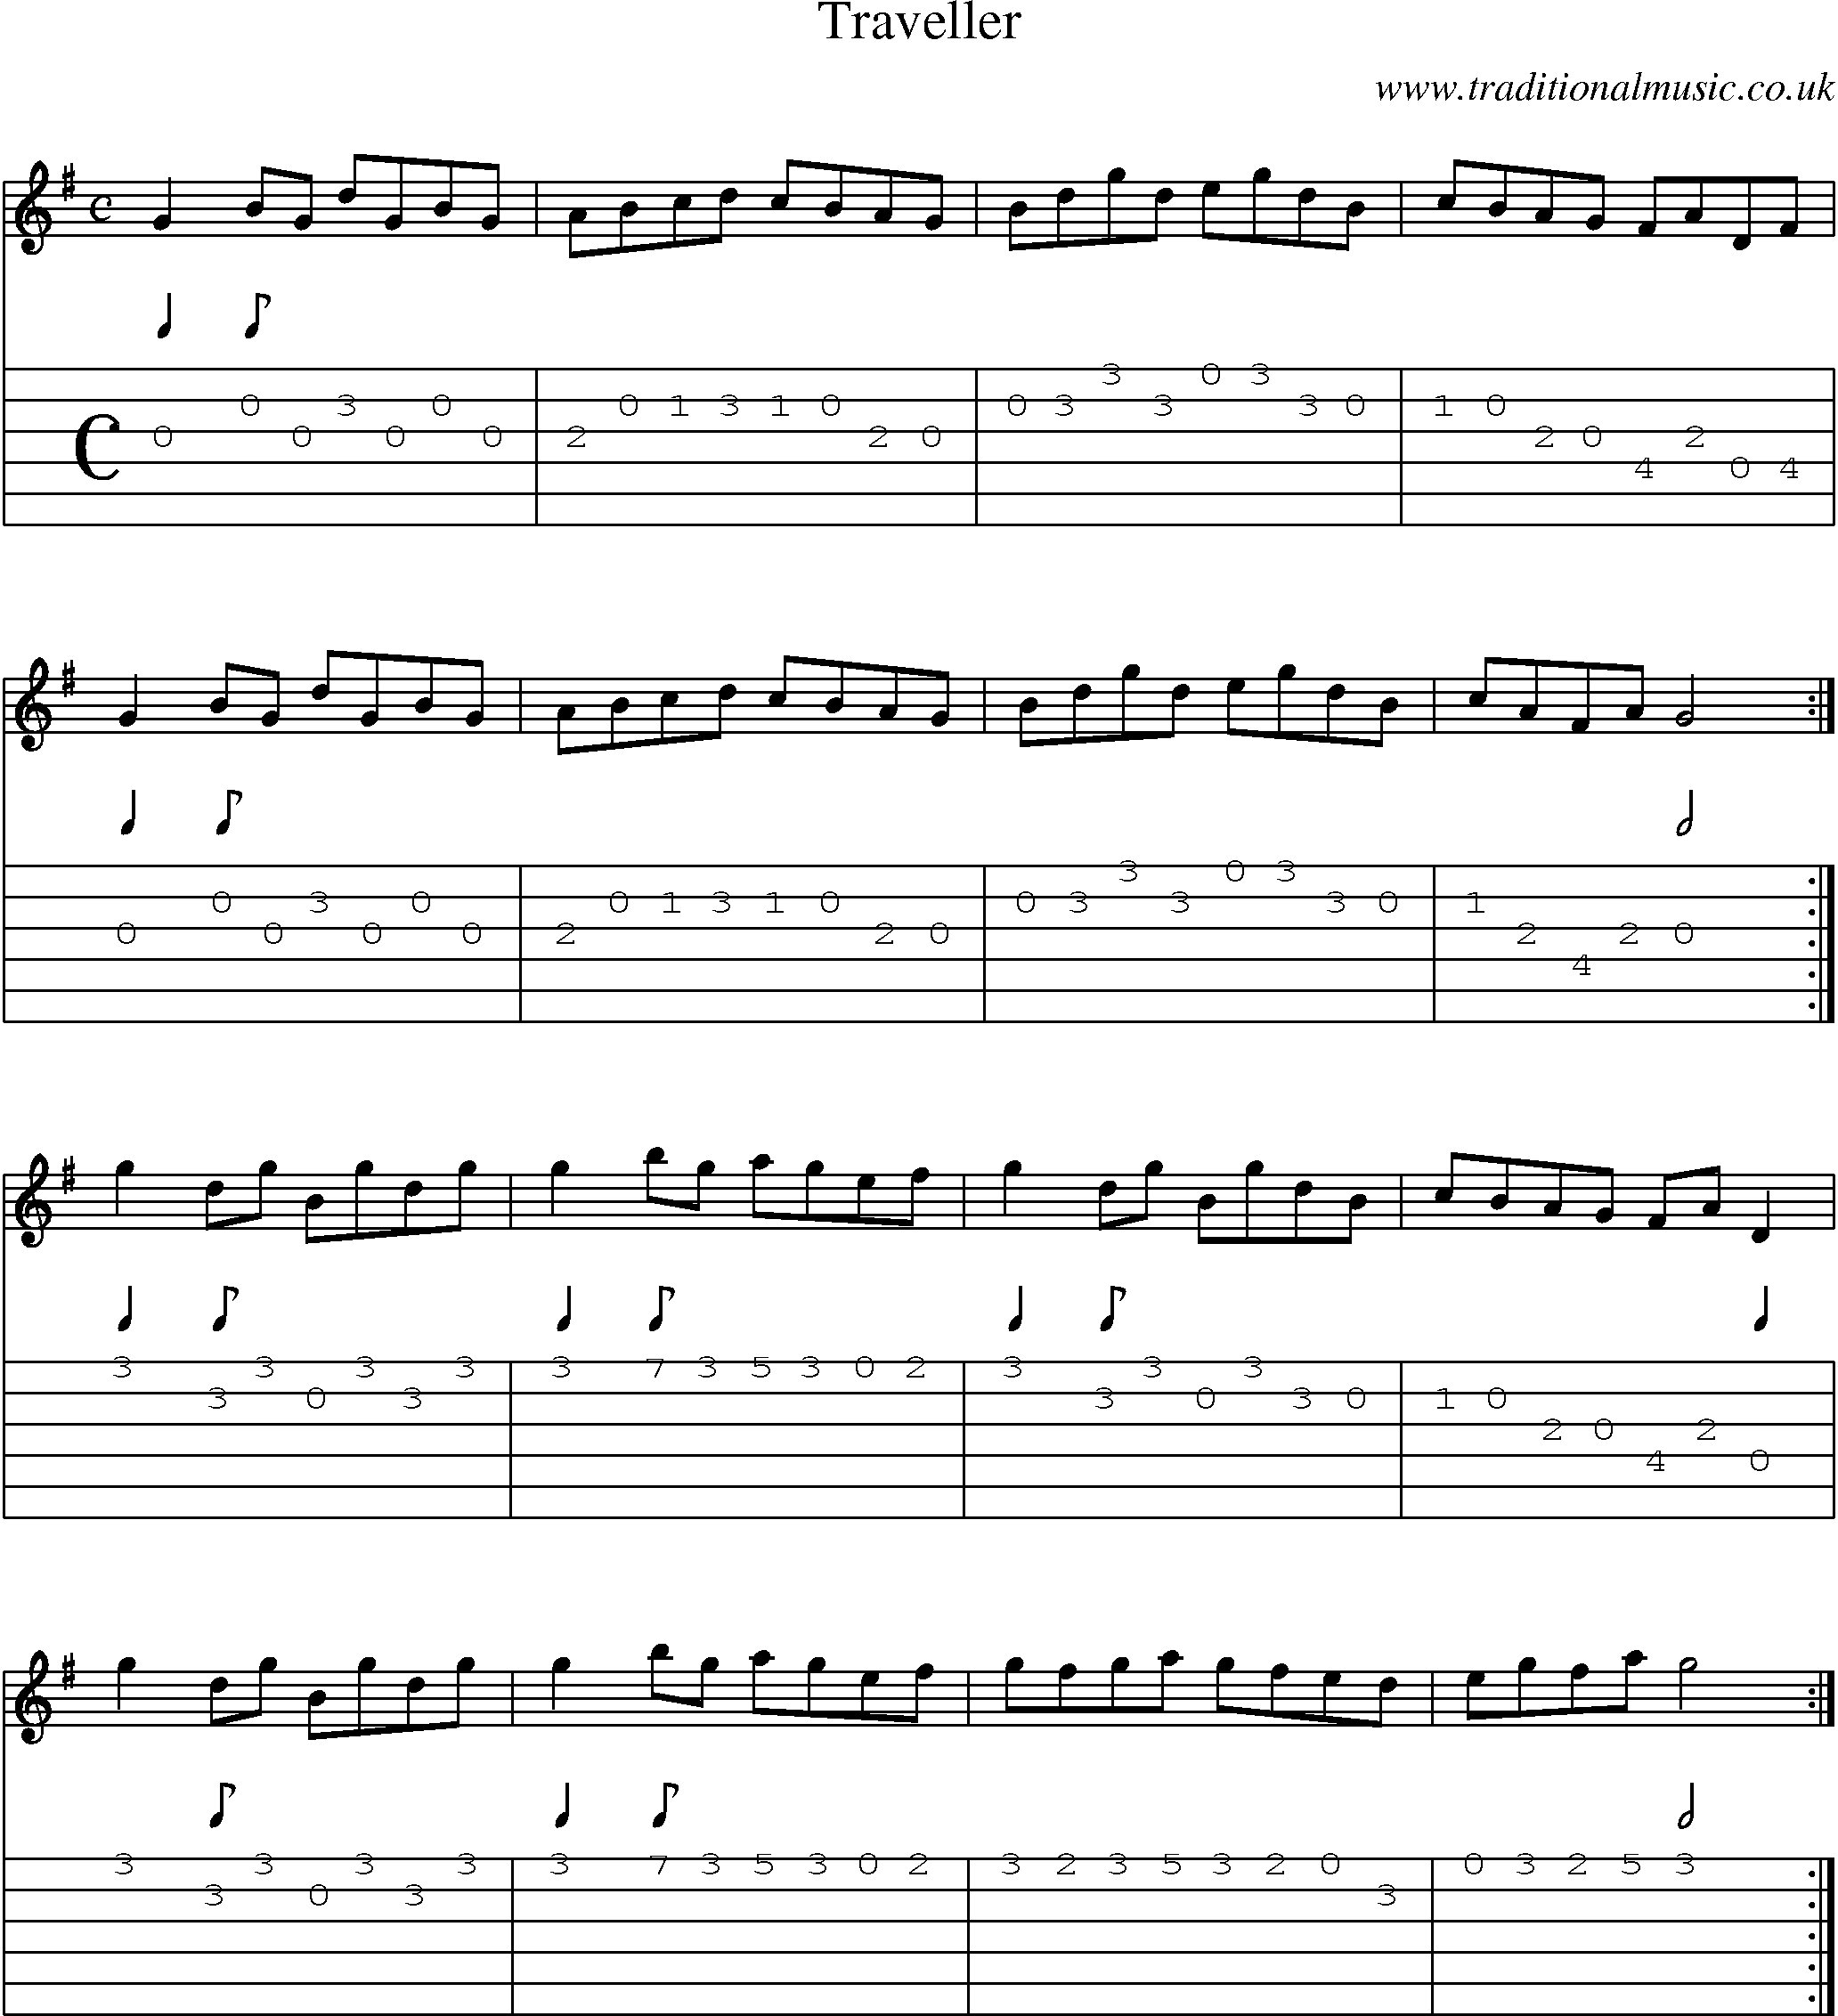 Music Score and Guitar Tabs for Traveller